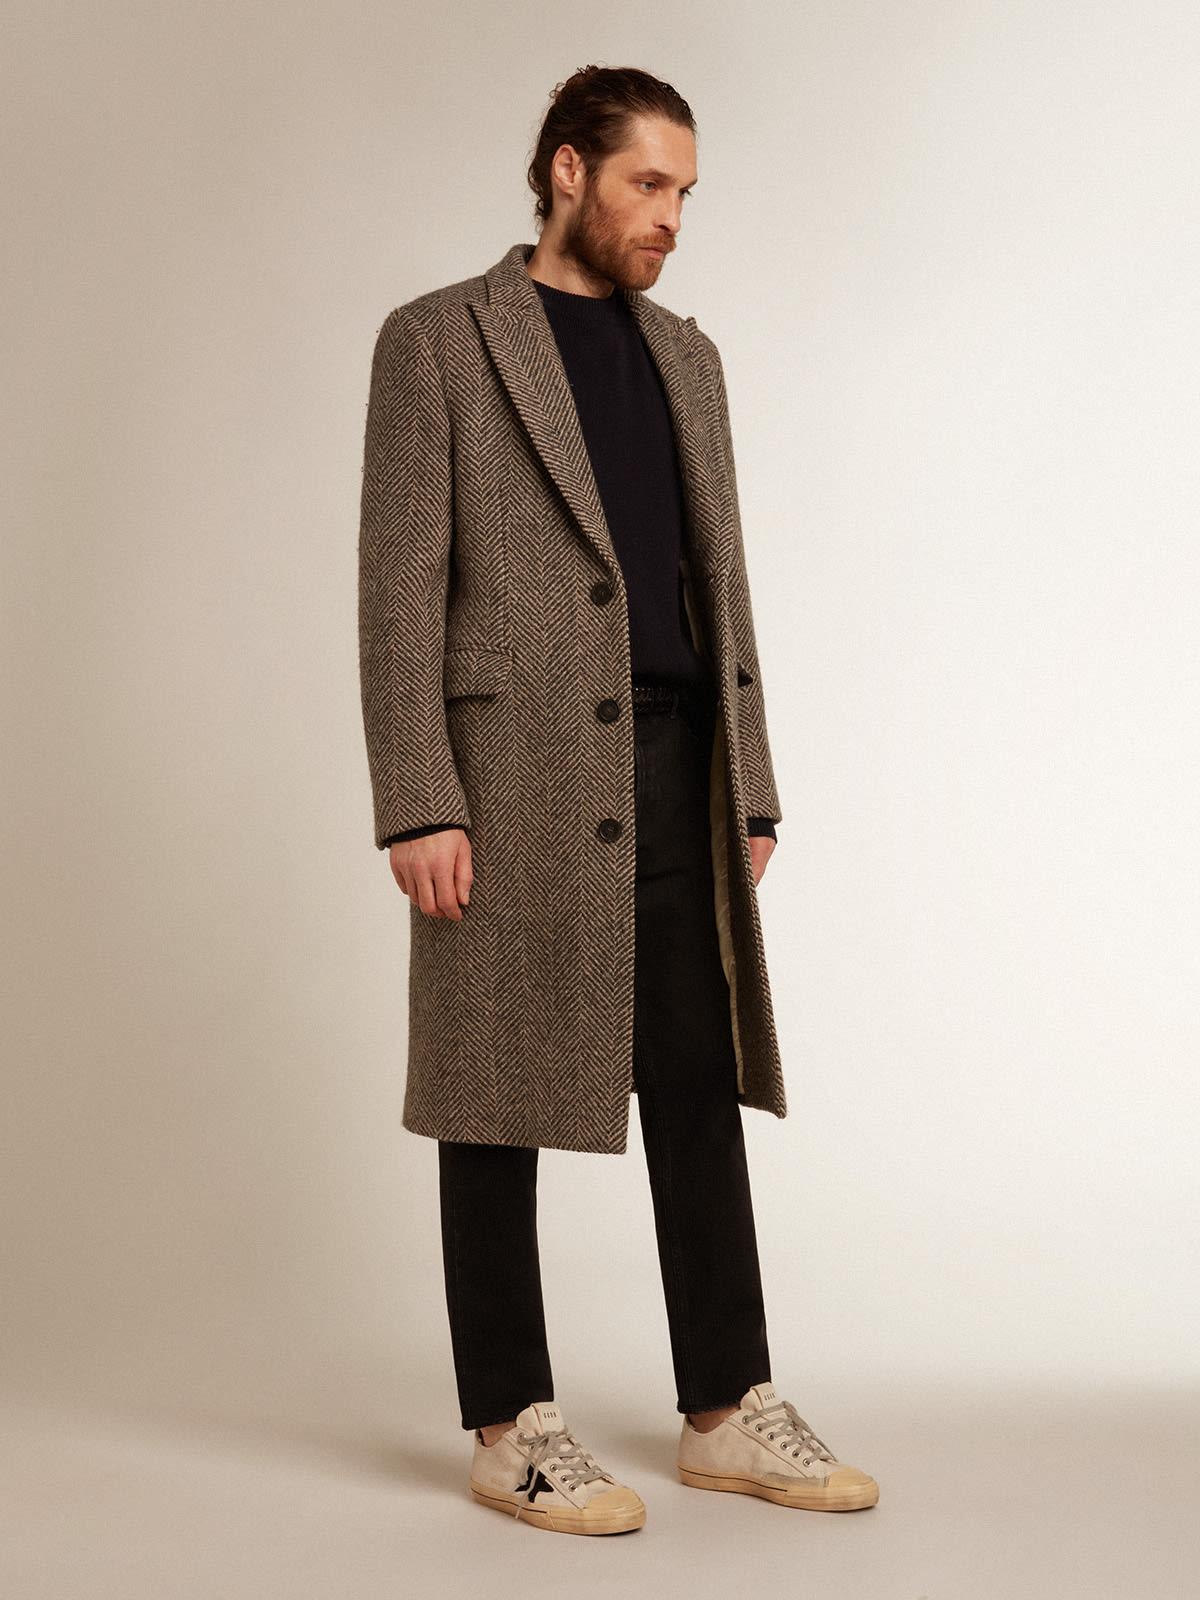 Golden Goose - Single-breasted coat in wool with herringbone weave in beige and gray   in 